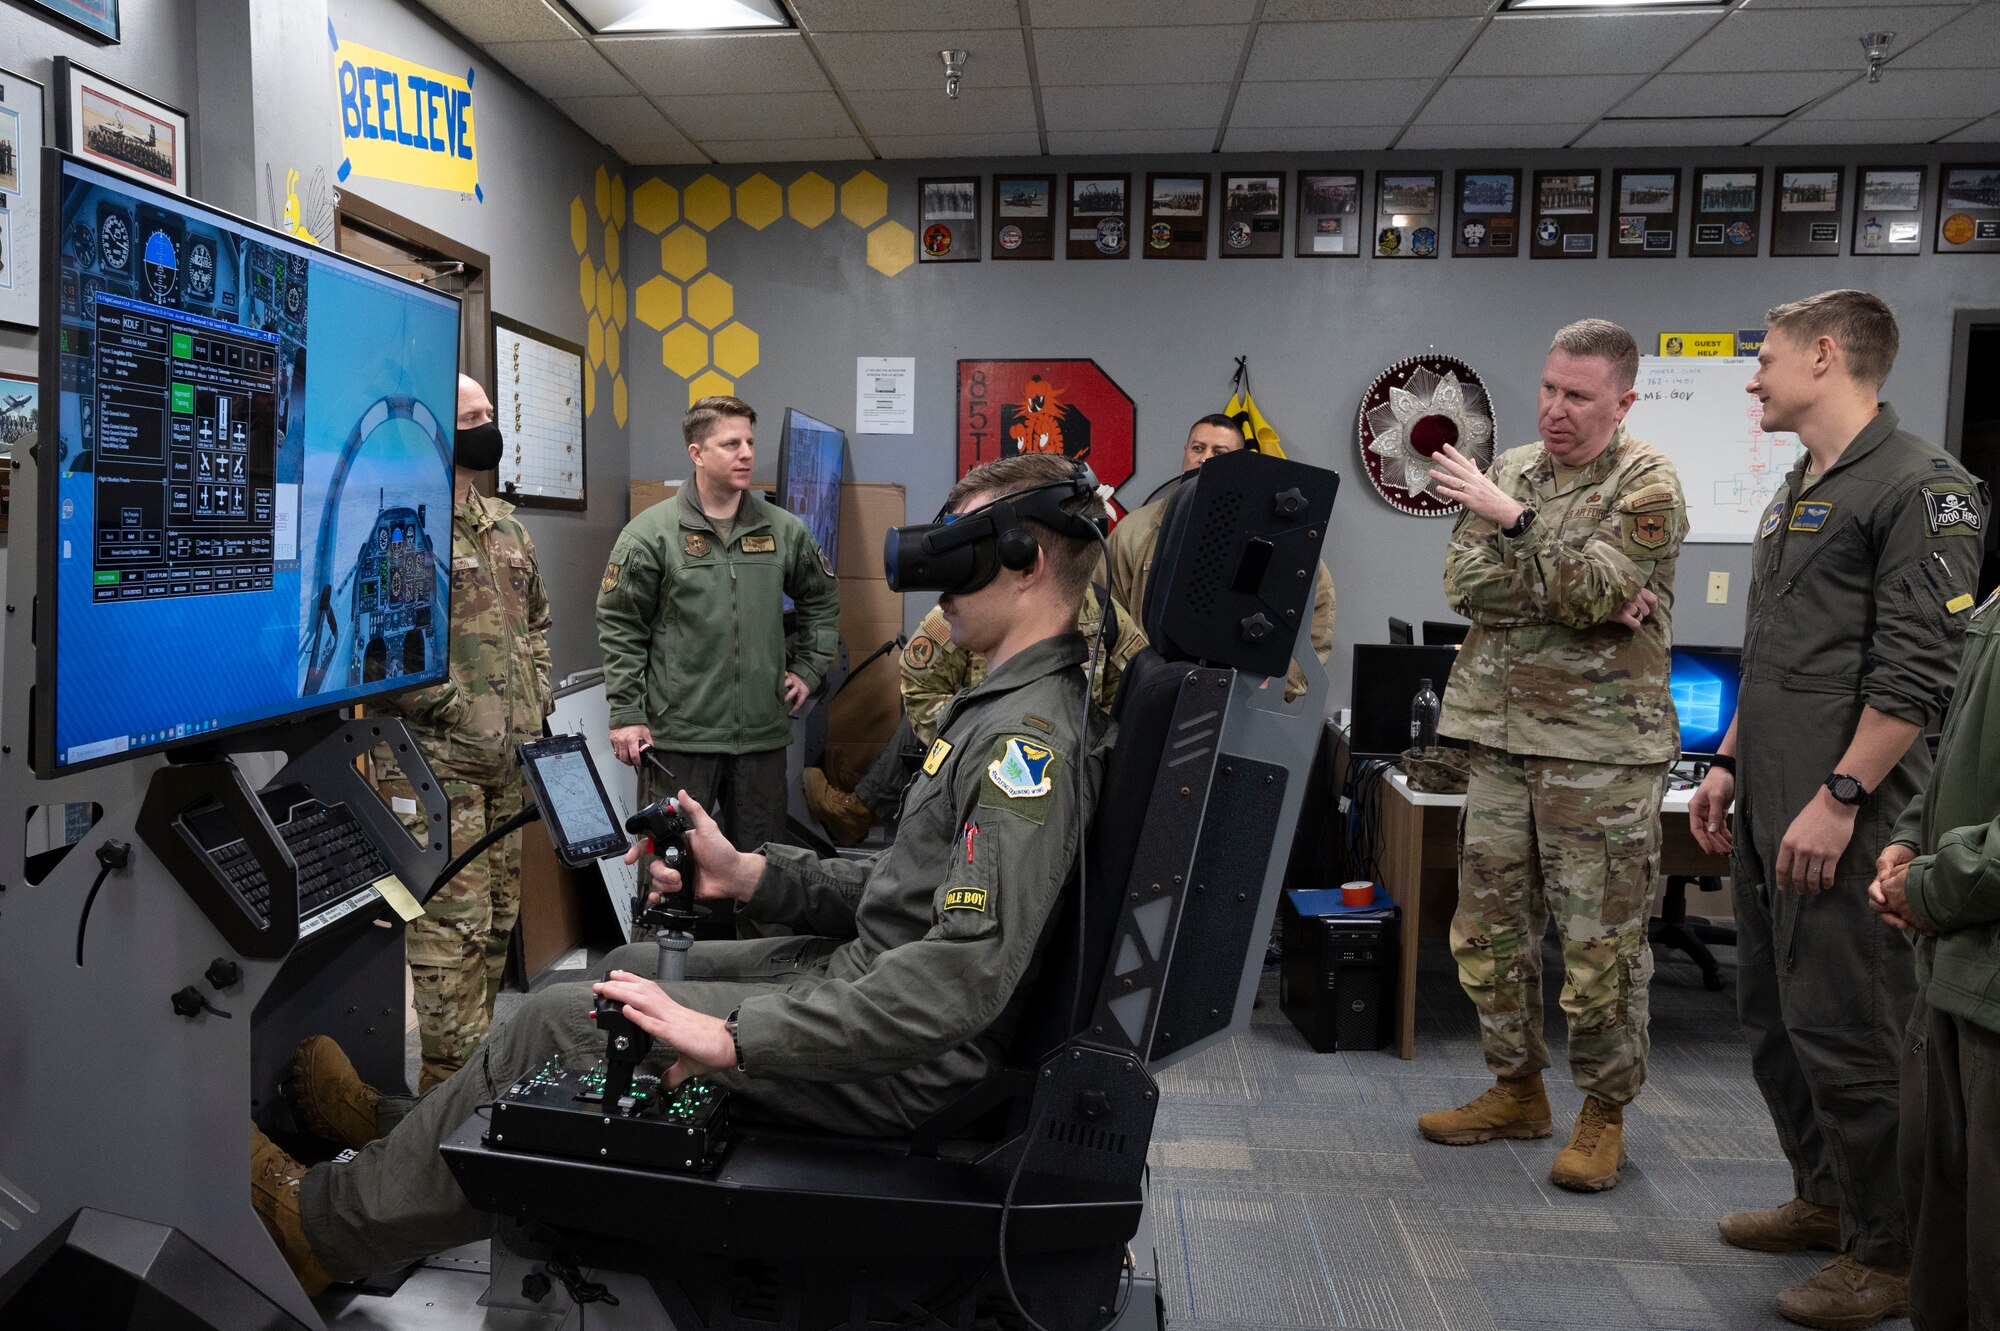 U.S. Air Force Capt. Aaron Robinson (right), 85th Flying Training Squadron T-6A Texan II instructor pilot, shows Chief Master Sgt. Chad Bickley (second from right), command chief for Air Education and Training Command, a T-6 aircraft simulator inside a 47th Student Squadron classroom at Laughlin Air Force Base, Texas, Jan. 22, 2024. Bickley spent time with Team XL members to get a closer look at of how Laughlin’s Airmen train student pilots to be the Air Force’s newest and most lethal pilots. (U.S. Air Force photo by Senior Airman Kailee Reynolds)